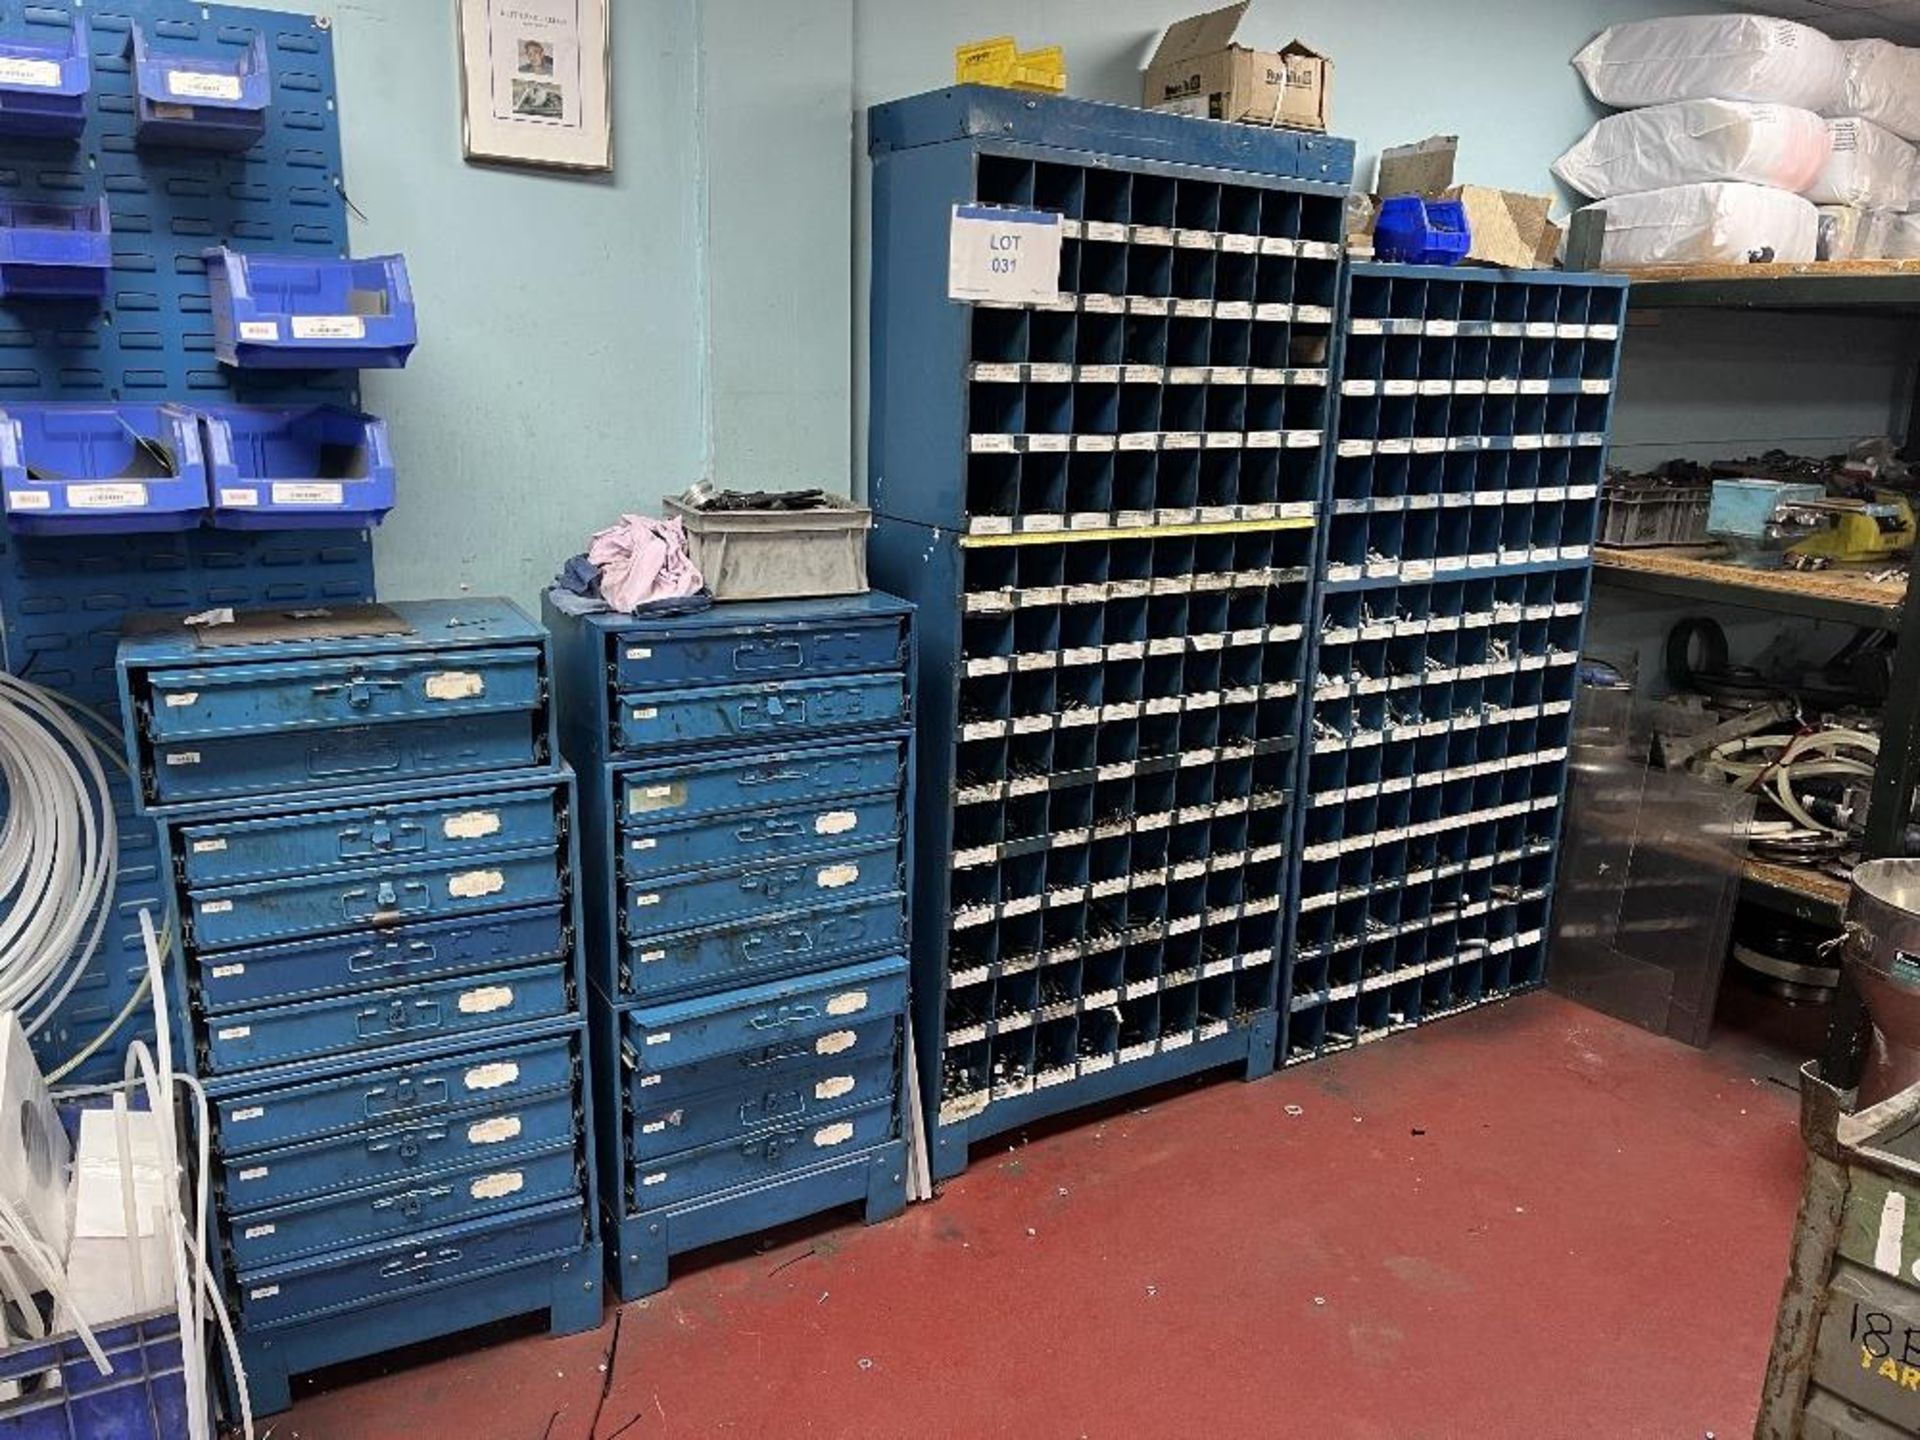 (6) steel drawer units and (3) steel racks with contents of fixings